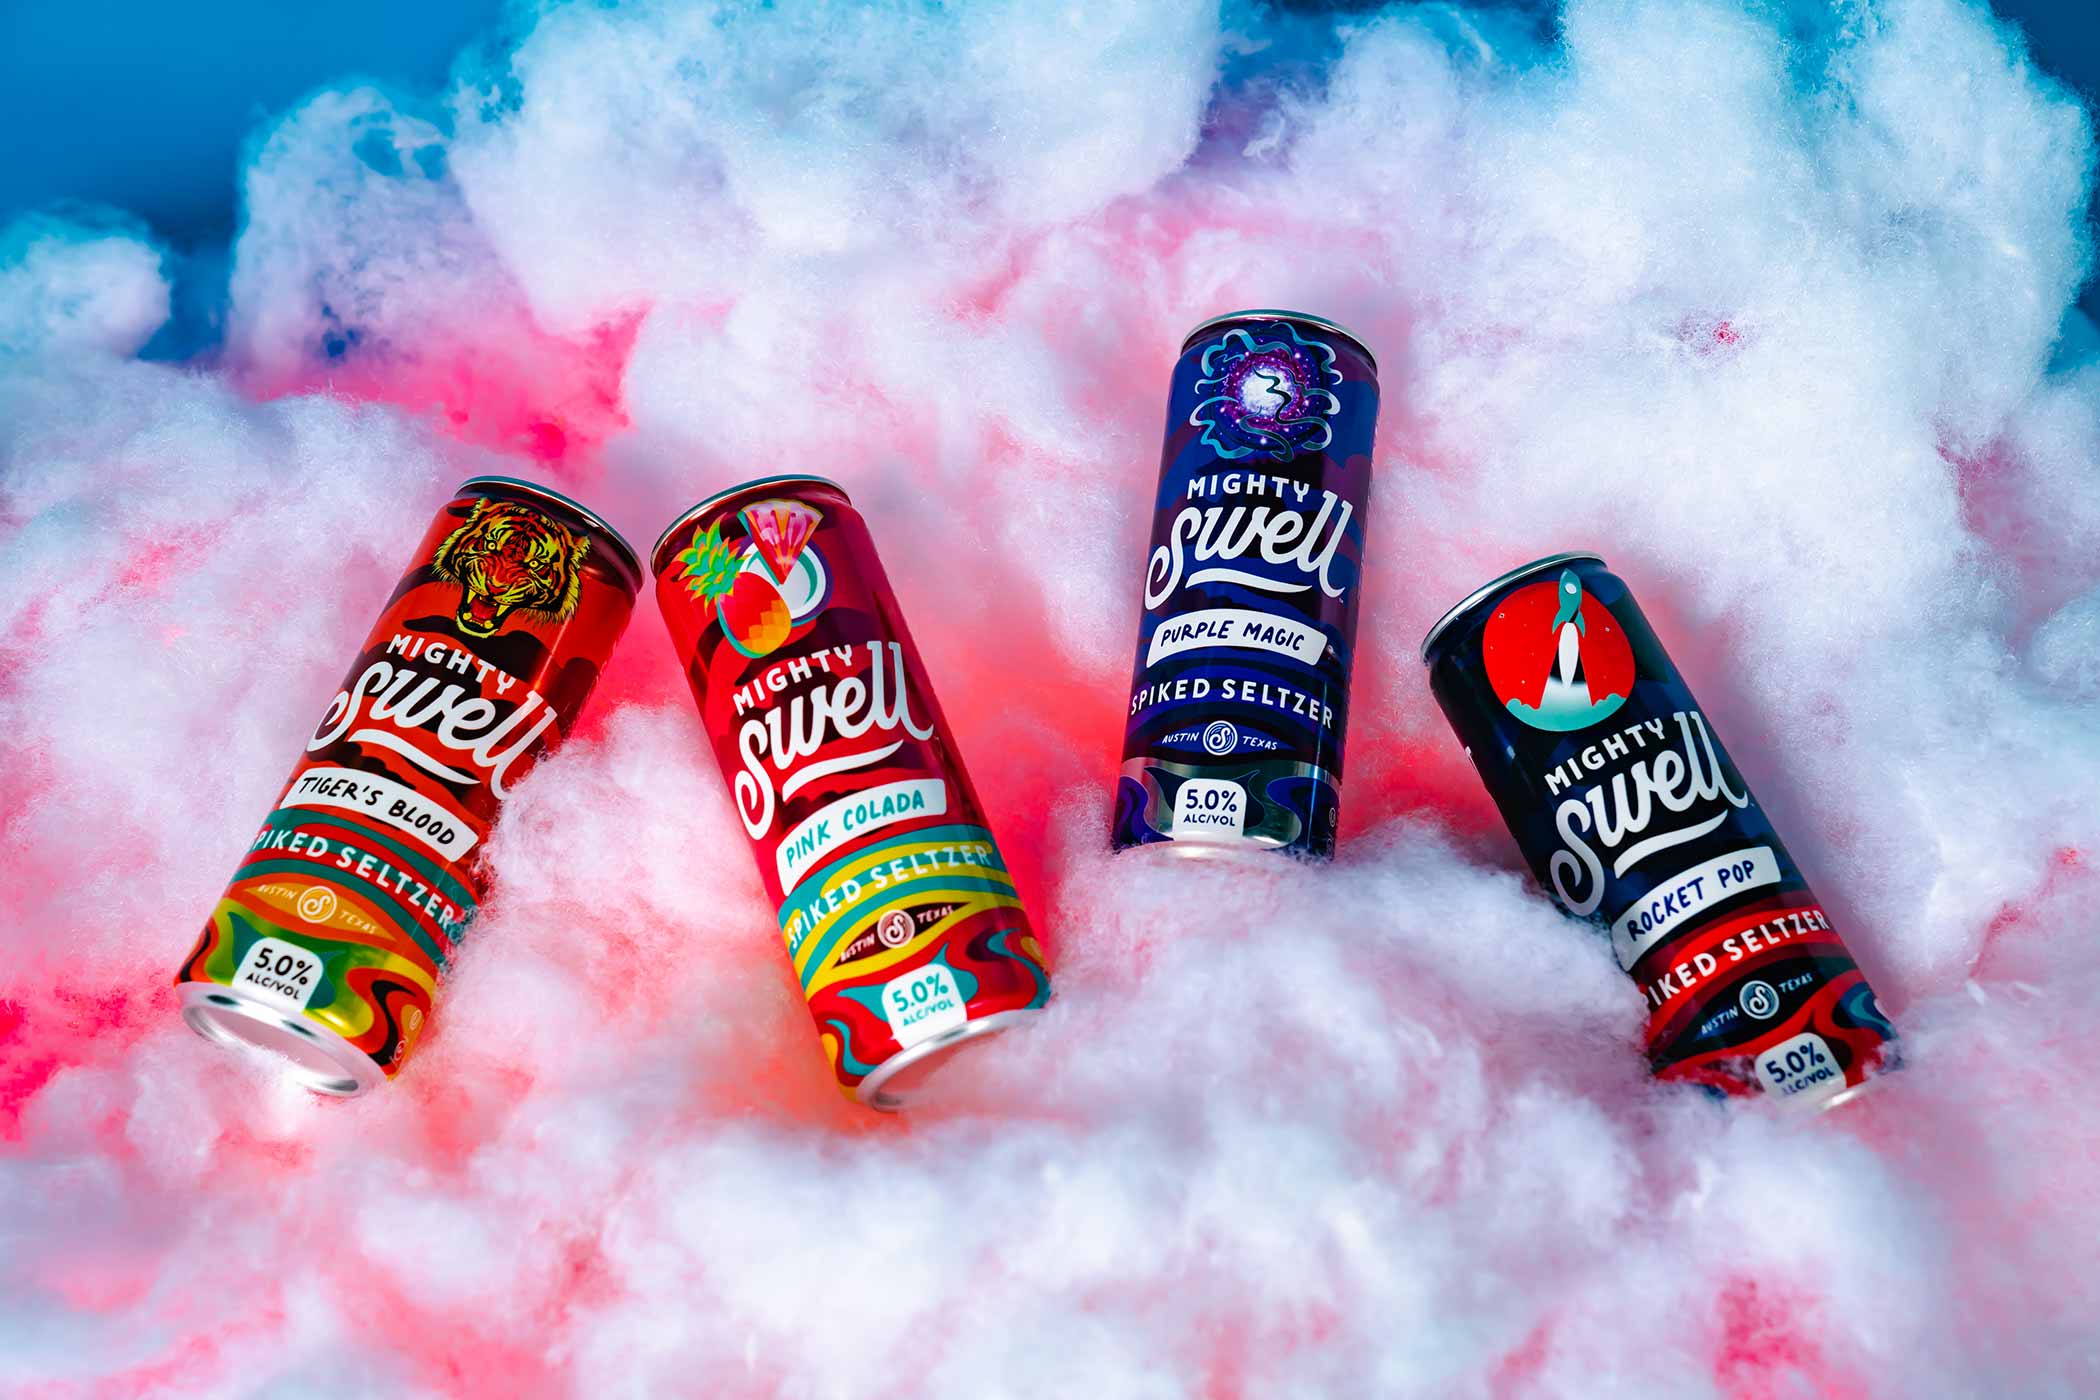 This New Mighty Swell Spiked Seltzer Variety Pack Has the Weirdest Flavors We’ve Ever Seen